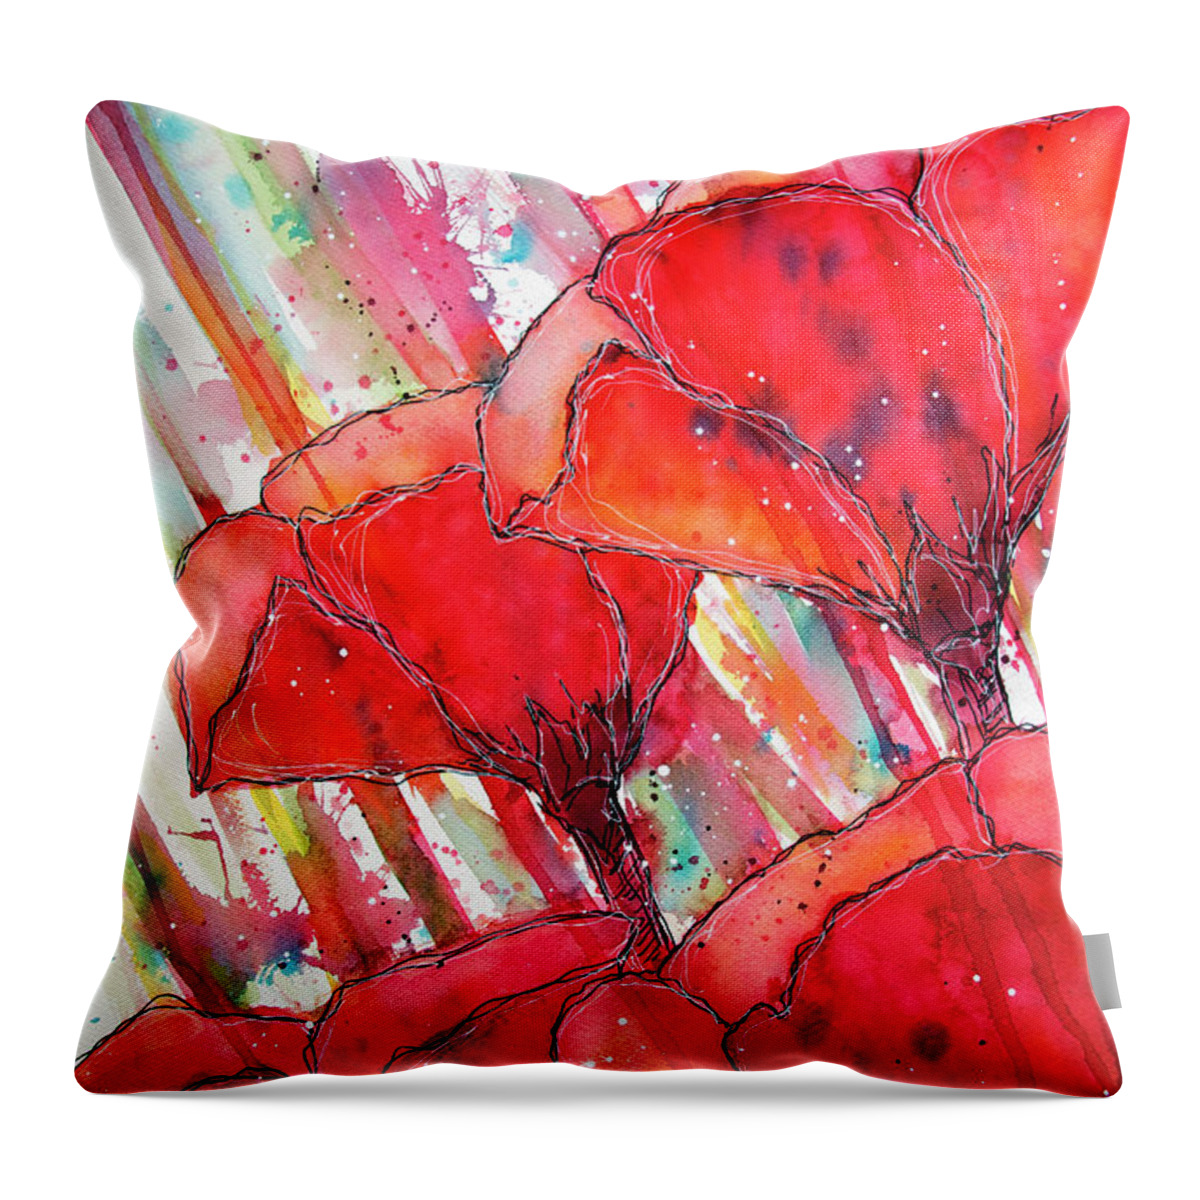 Abstract Throw Pillow featuring the painting Abstracted Poppies No.2 by Rebecca Davis